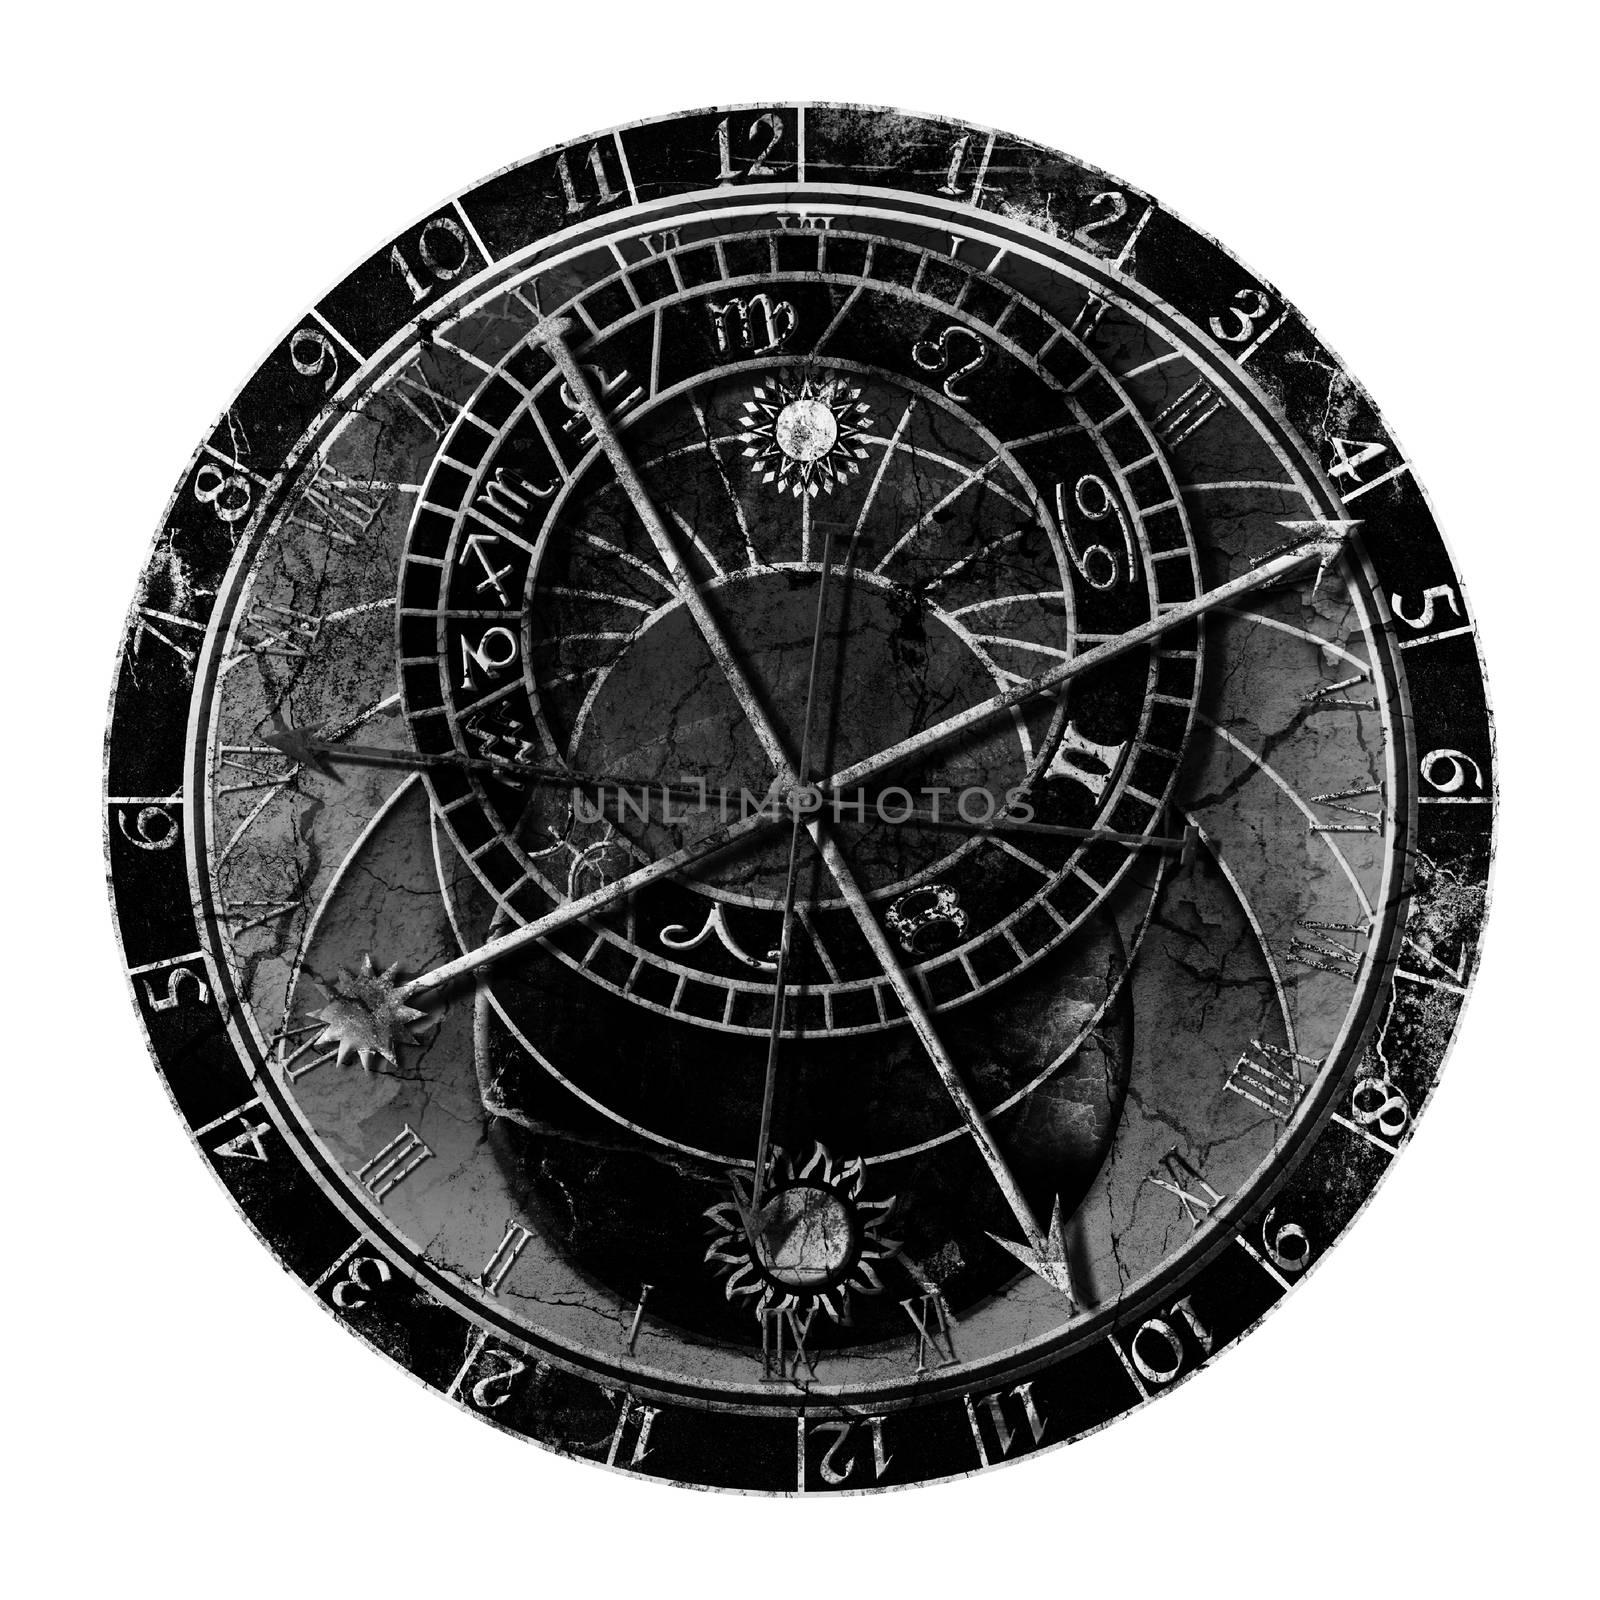 Astronomical Clock In Grunge Style by Mibuch